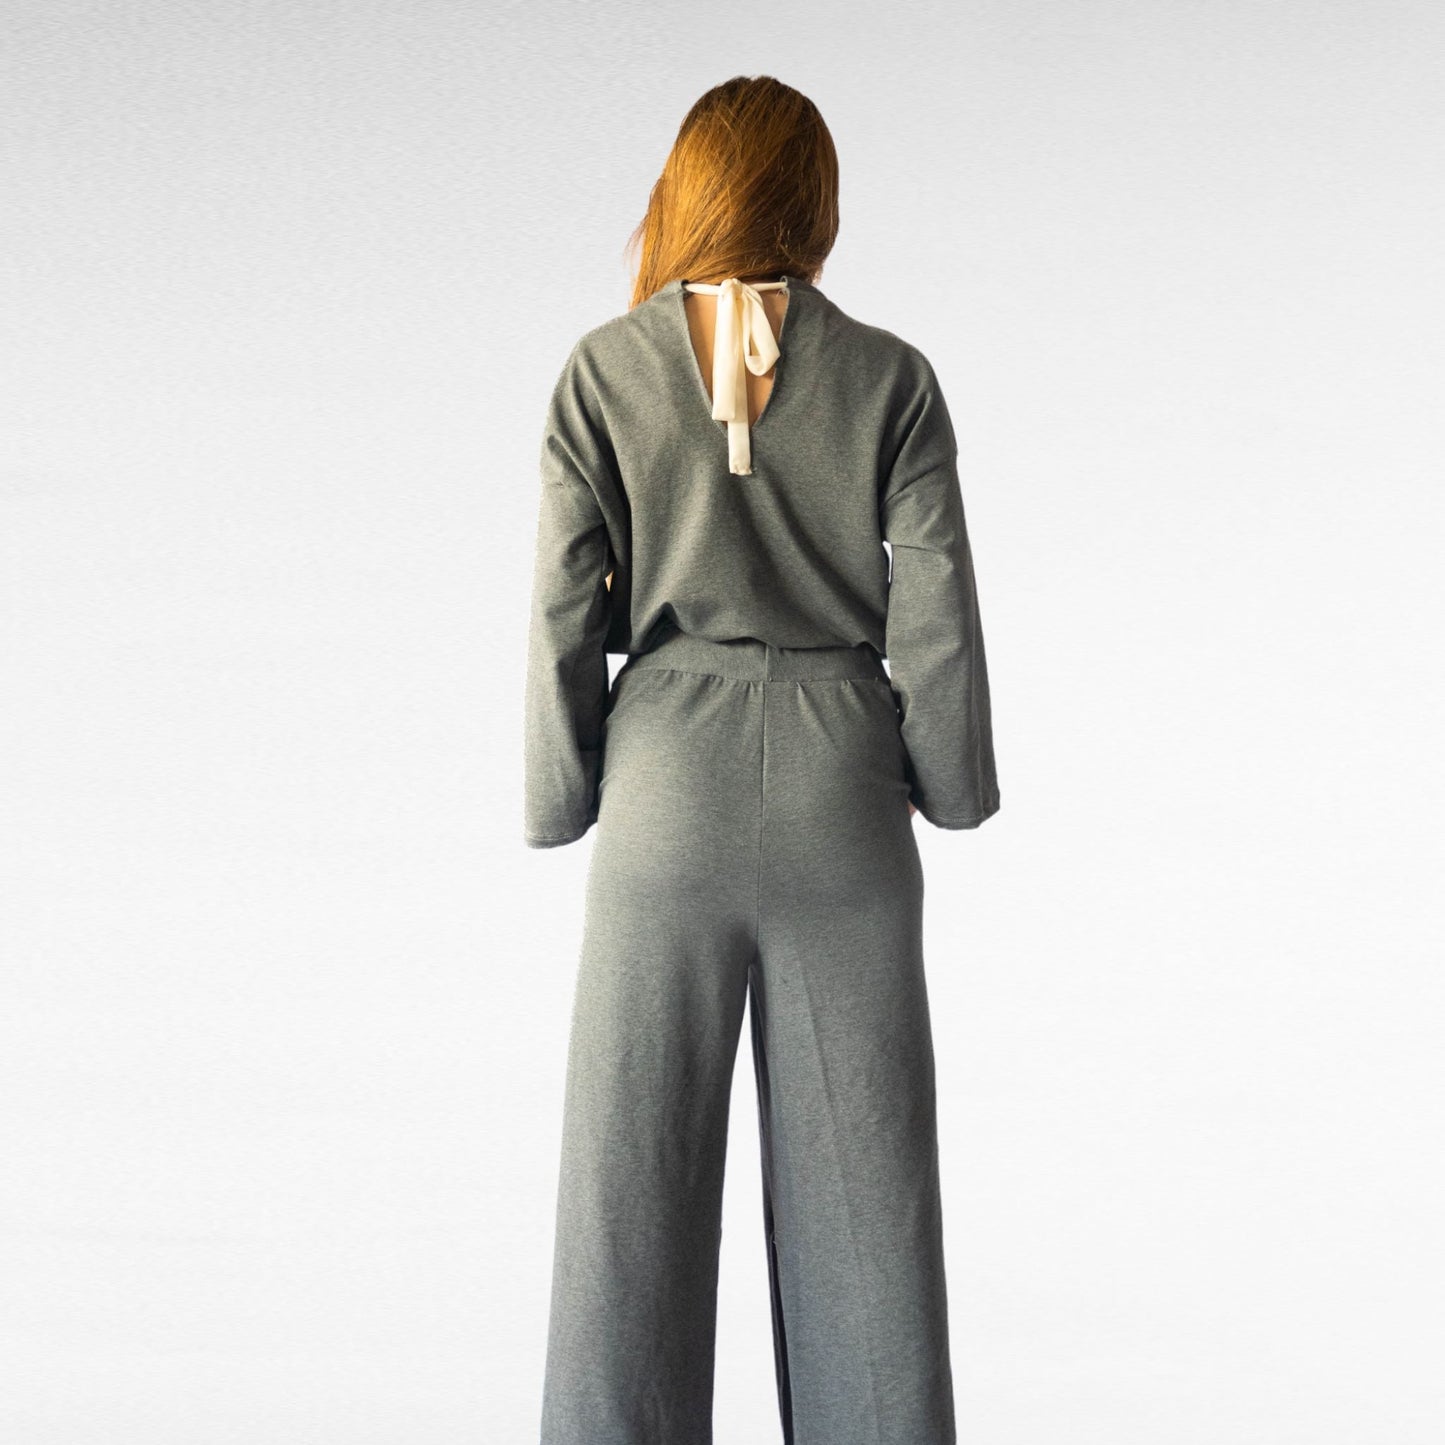 French Terry cozy grey suit